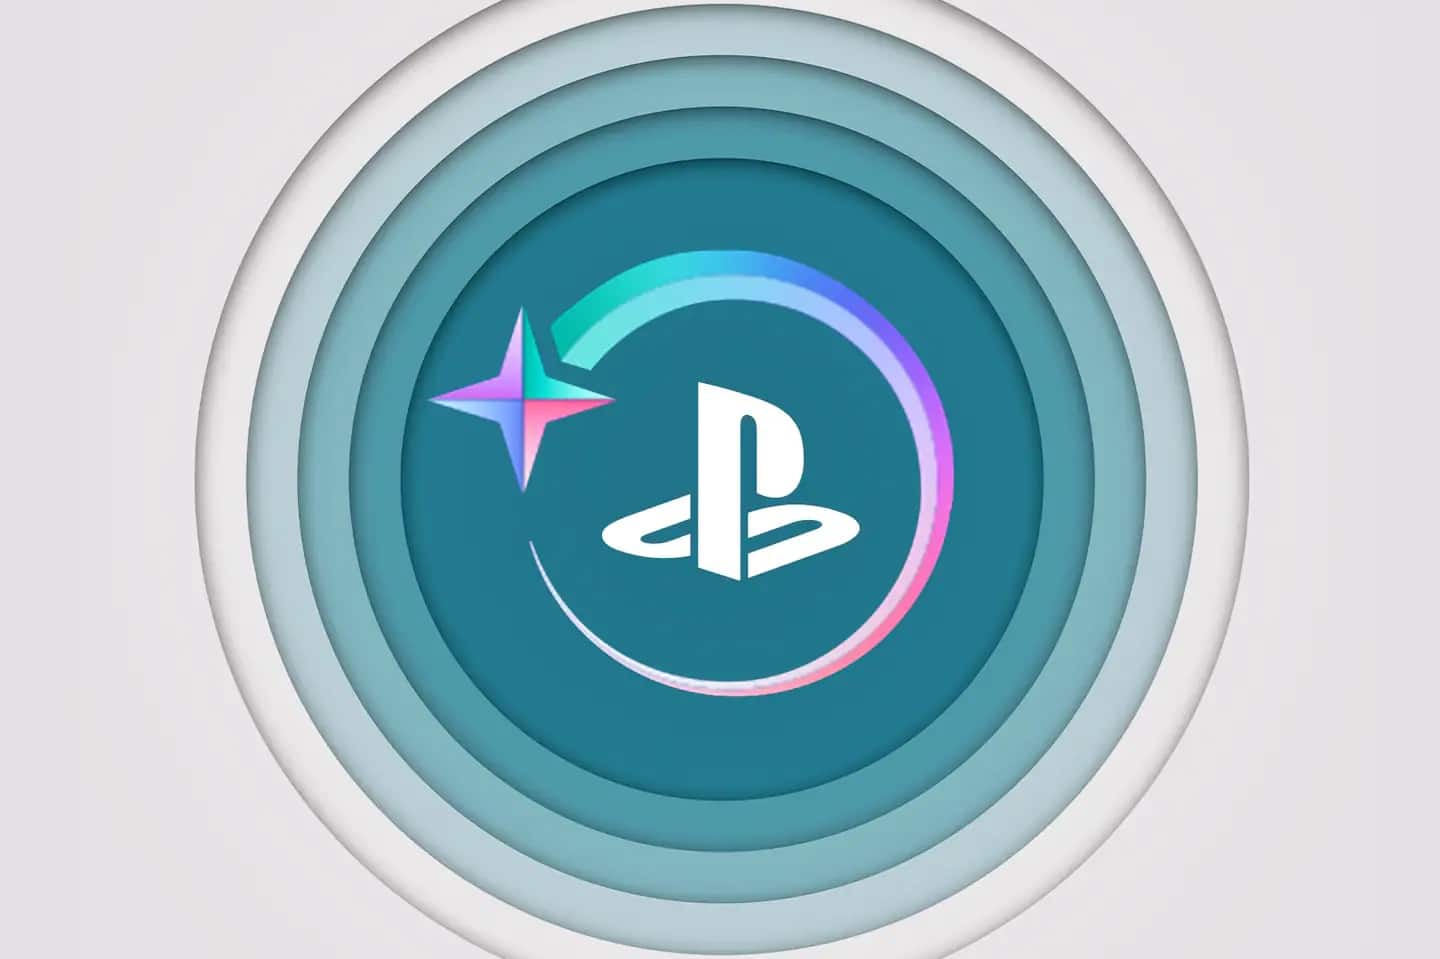 Can you only purchase these psn cards from Playstation Stars